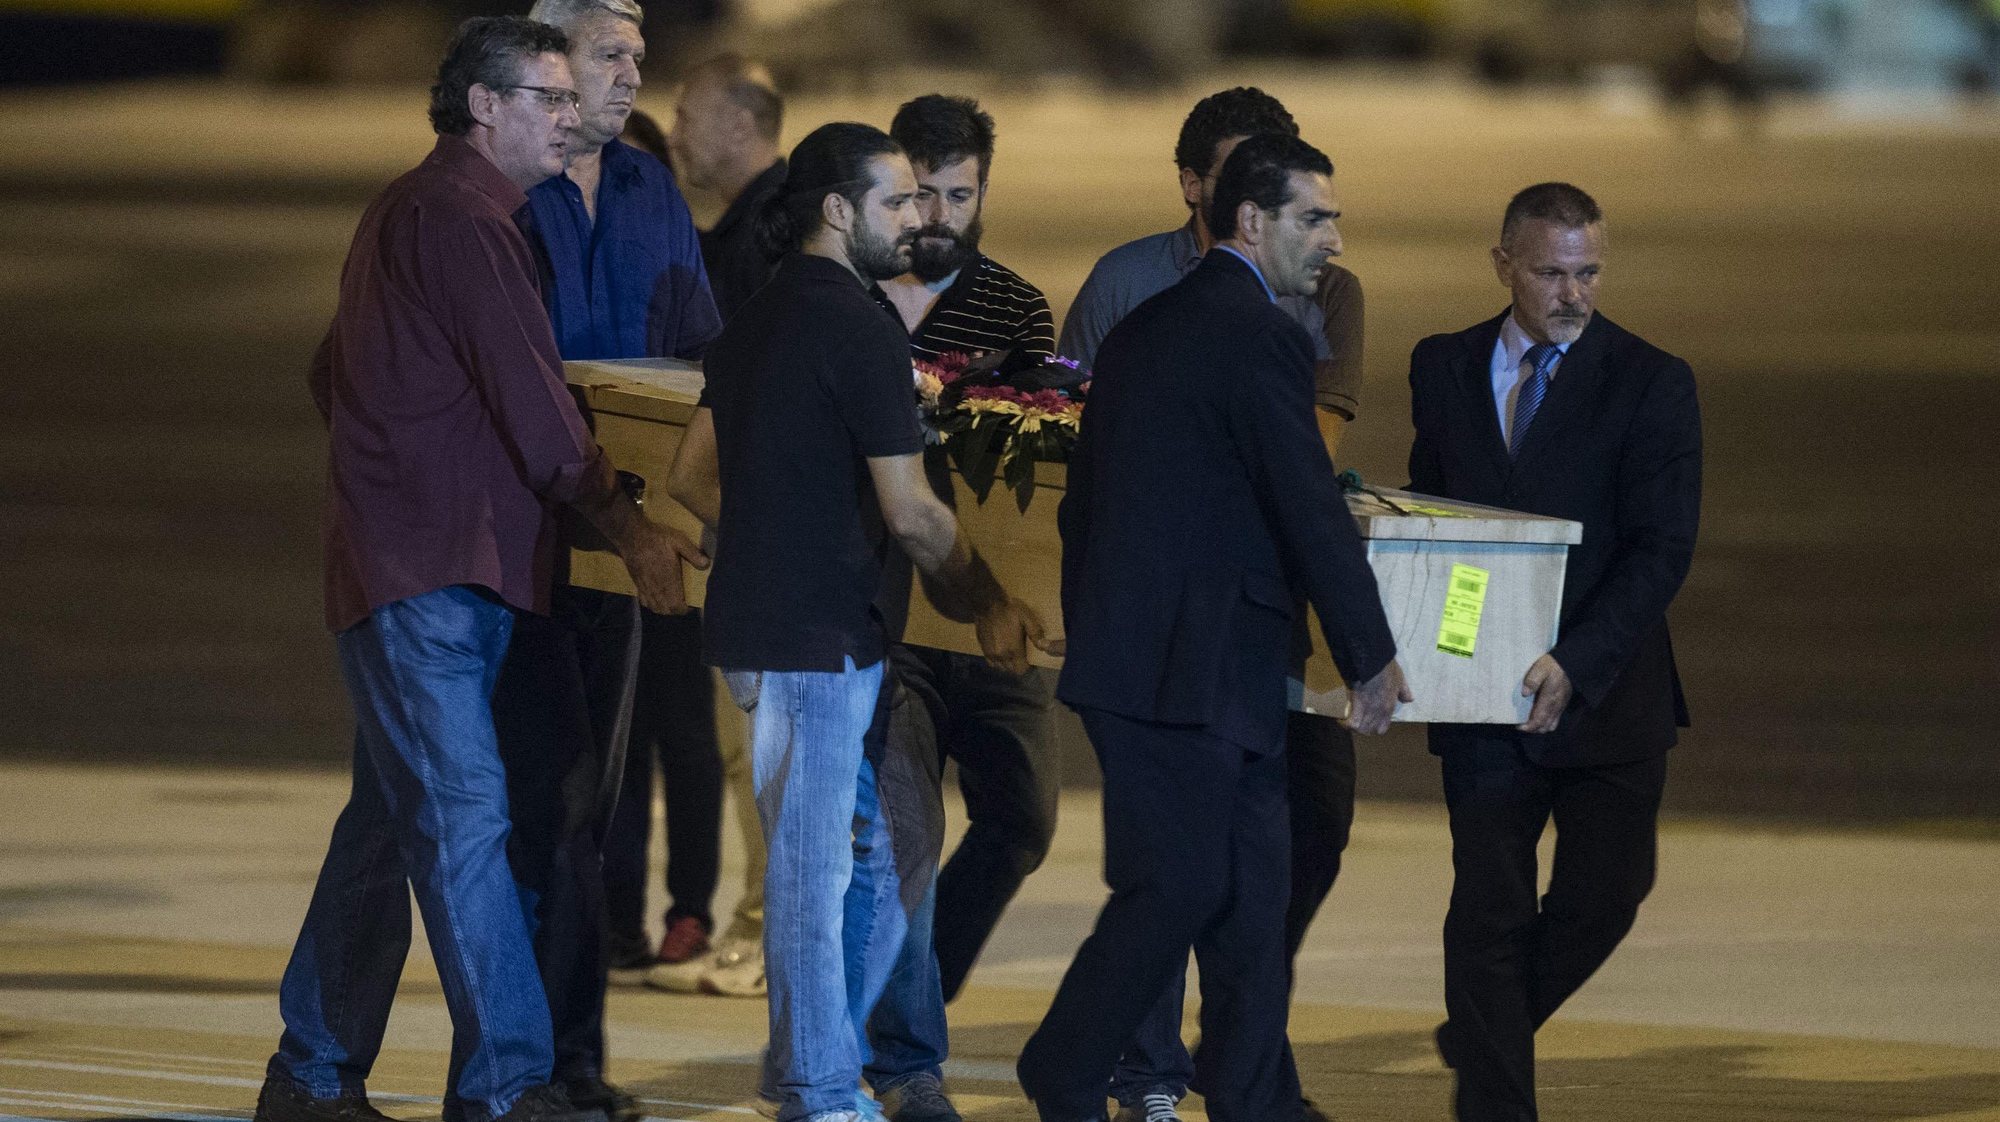 epa04353989 The coffin of Simone Camilli arrives to Ciampino Airport, Rome, 14 August 2014, from Jerusalem. Camilli, 35, a war reporter, was killed on 13 August in the Gaza strip by Israeli ordnance along with a Palestinian colleague and three Palestinian explosives experts who were trying to defuse it. The Italian reporter is the first foreign journalist to be killed in the Gaza conflict.  EPA/ANGELO CARCONI